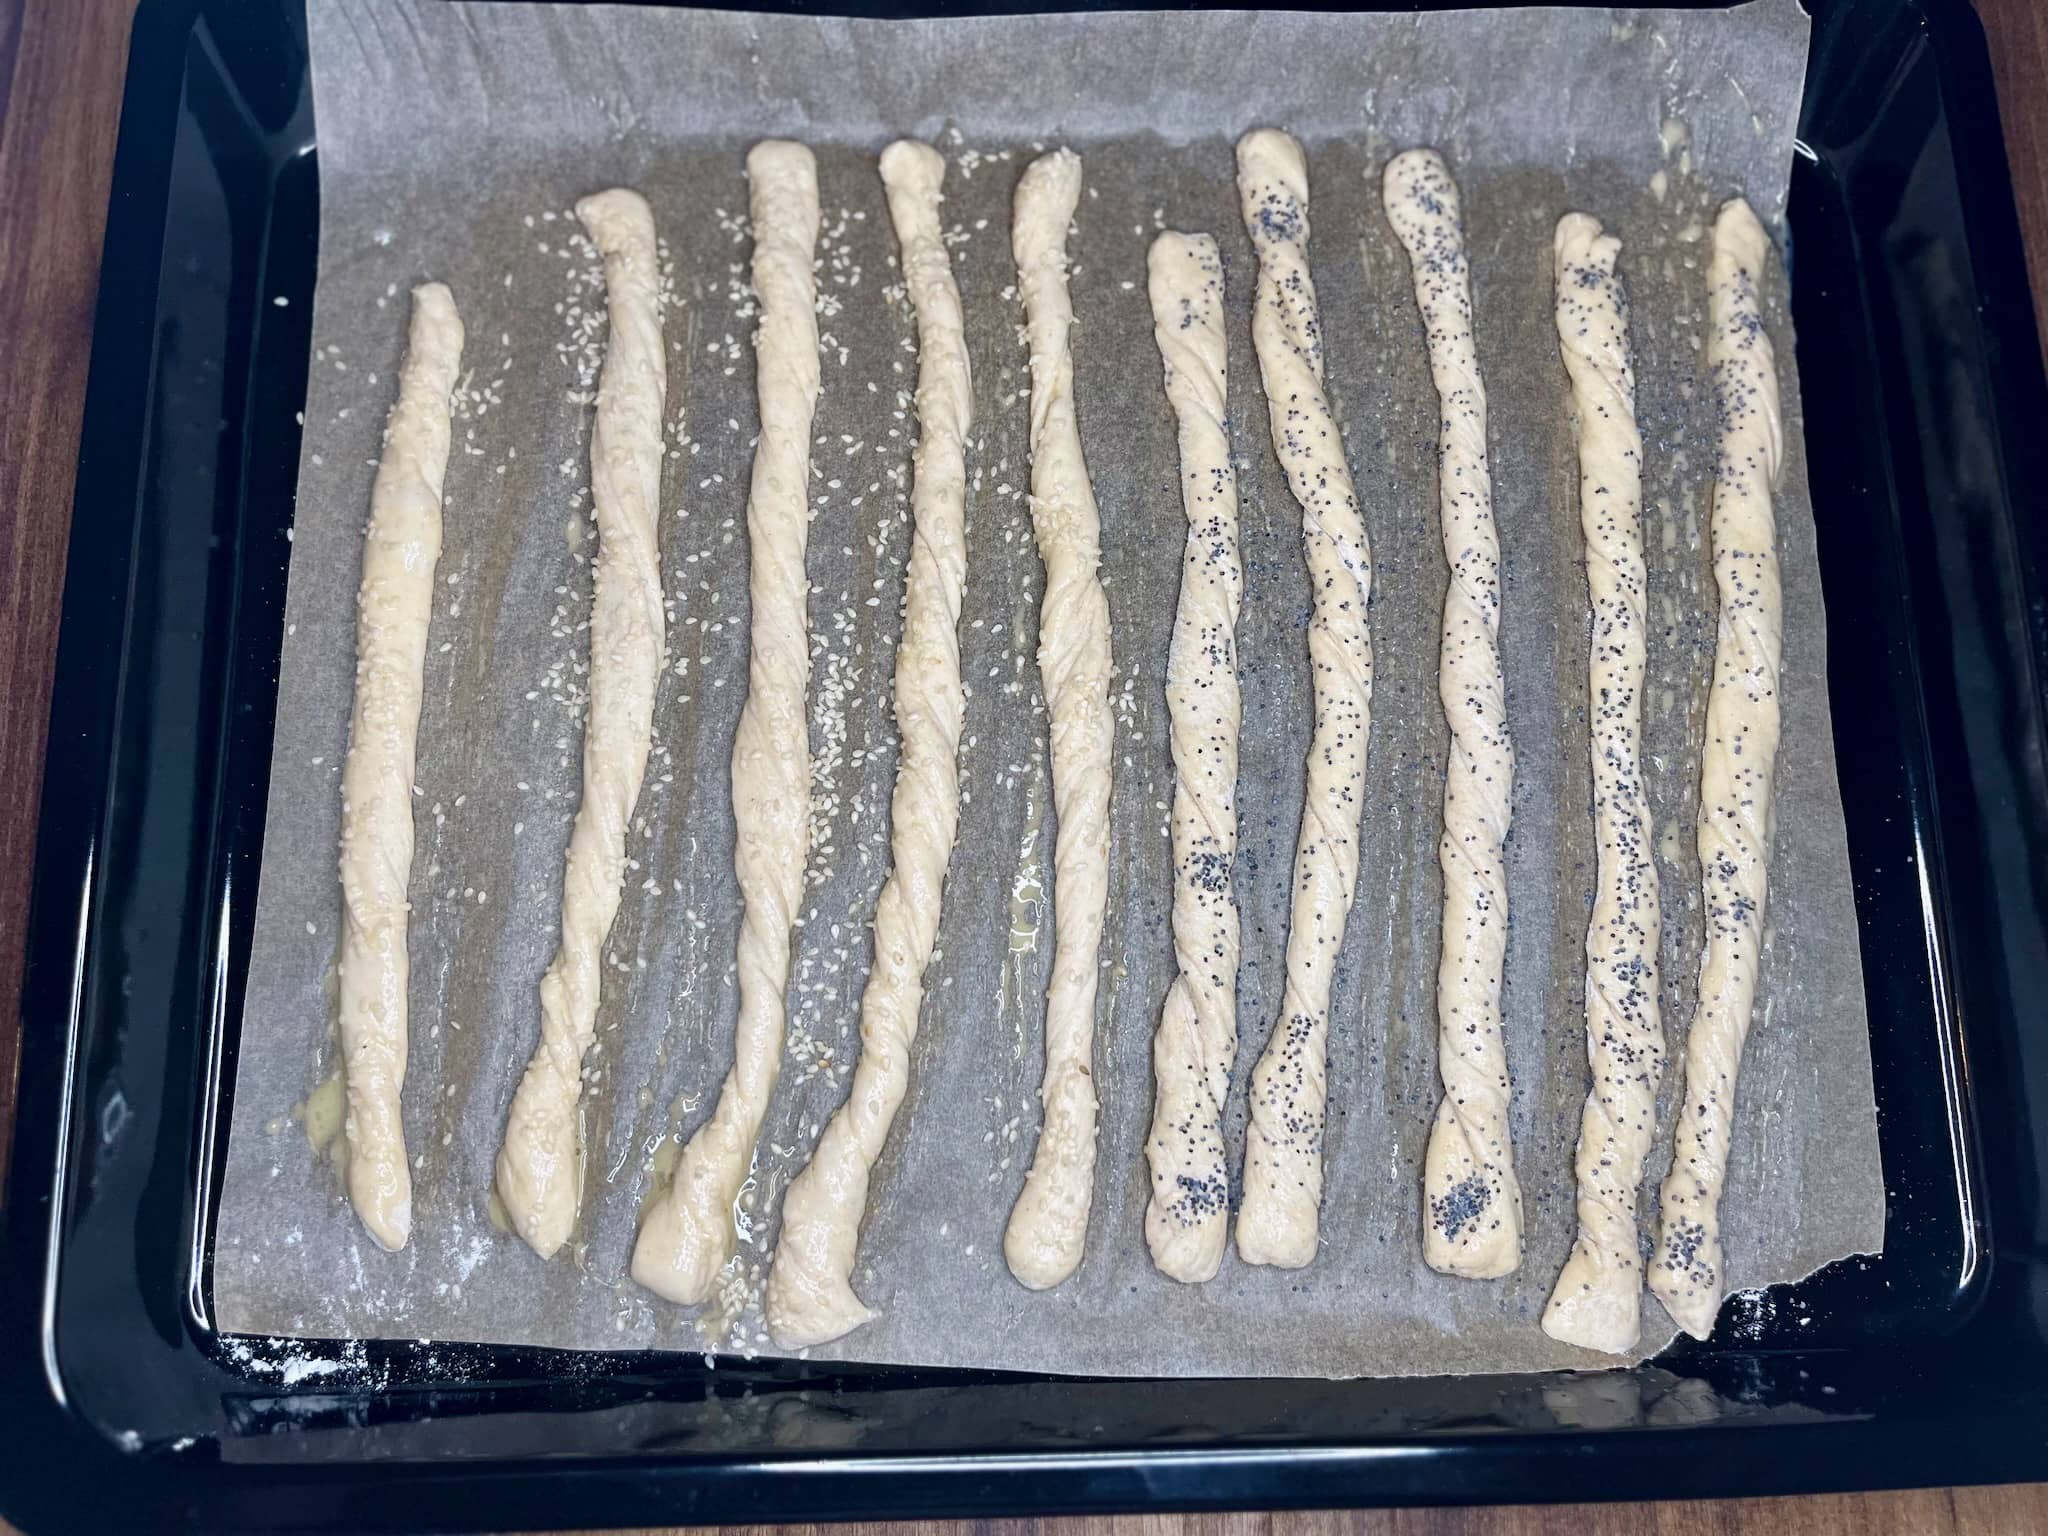 Breadsticks dough egg washed and sprinkled with sesame and poppy seeds on the baking tray ready for baking